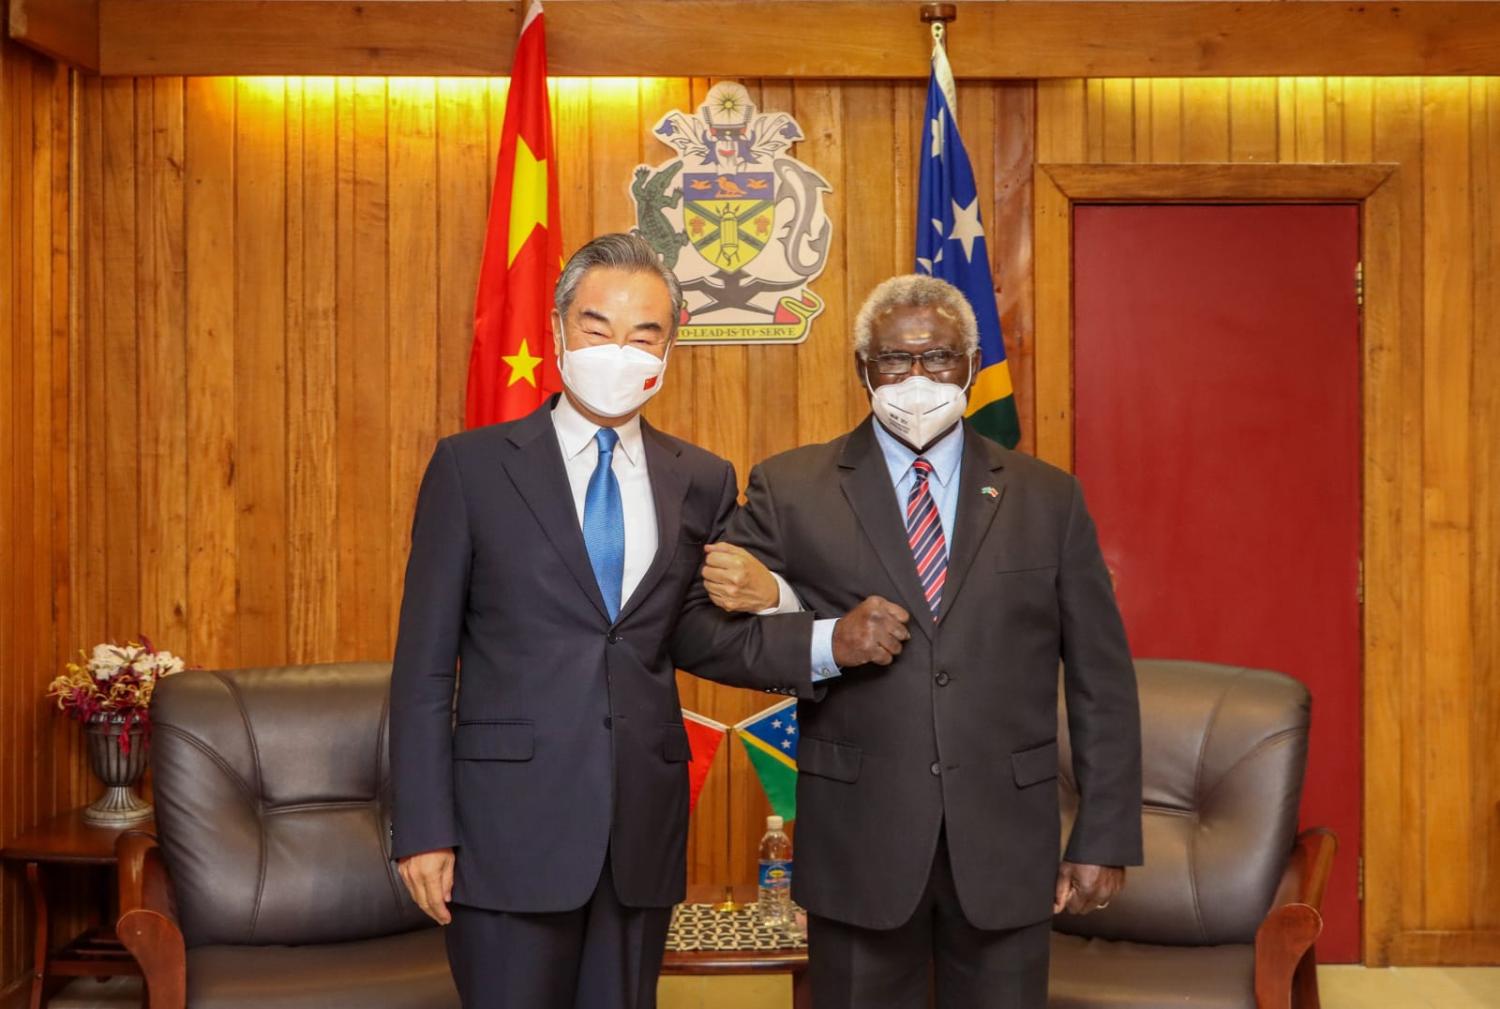 Solomon Islands Prime Minister Manasseh Sogavare (right) meets with China's Foreign Minister Wang Yi in Honiara, Solomon Islands, in May (Xinhua via Getty Images)